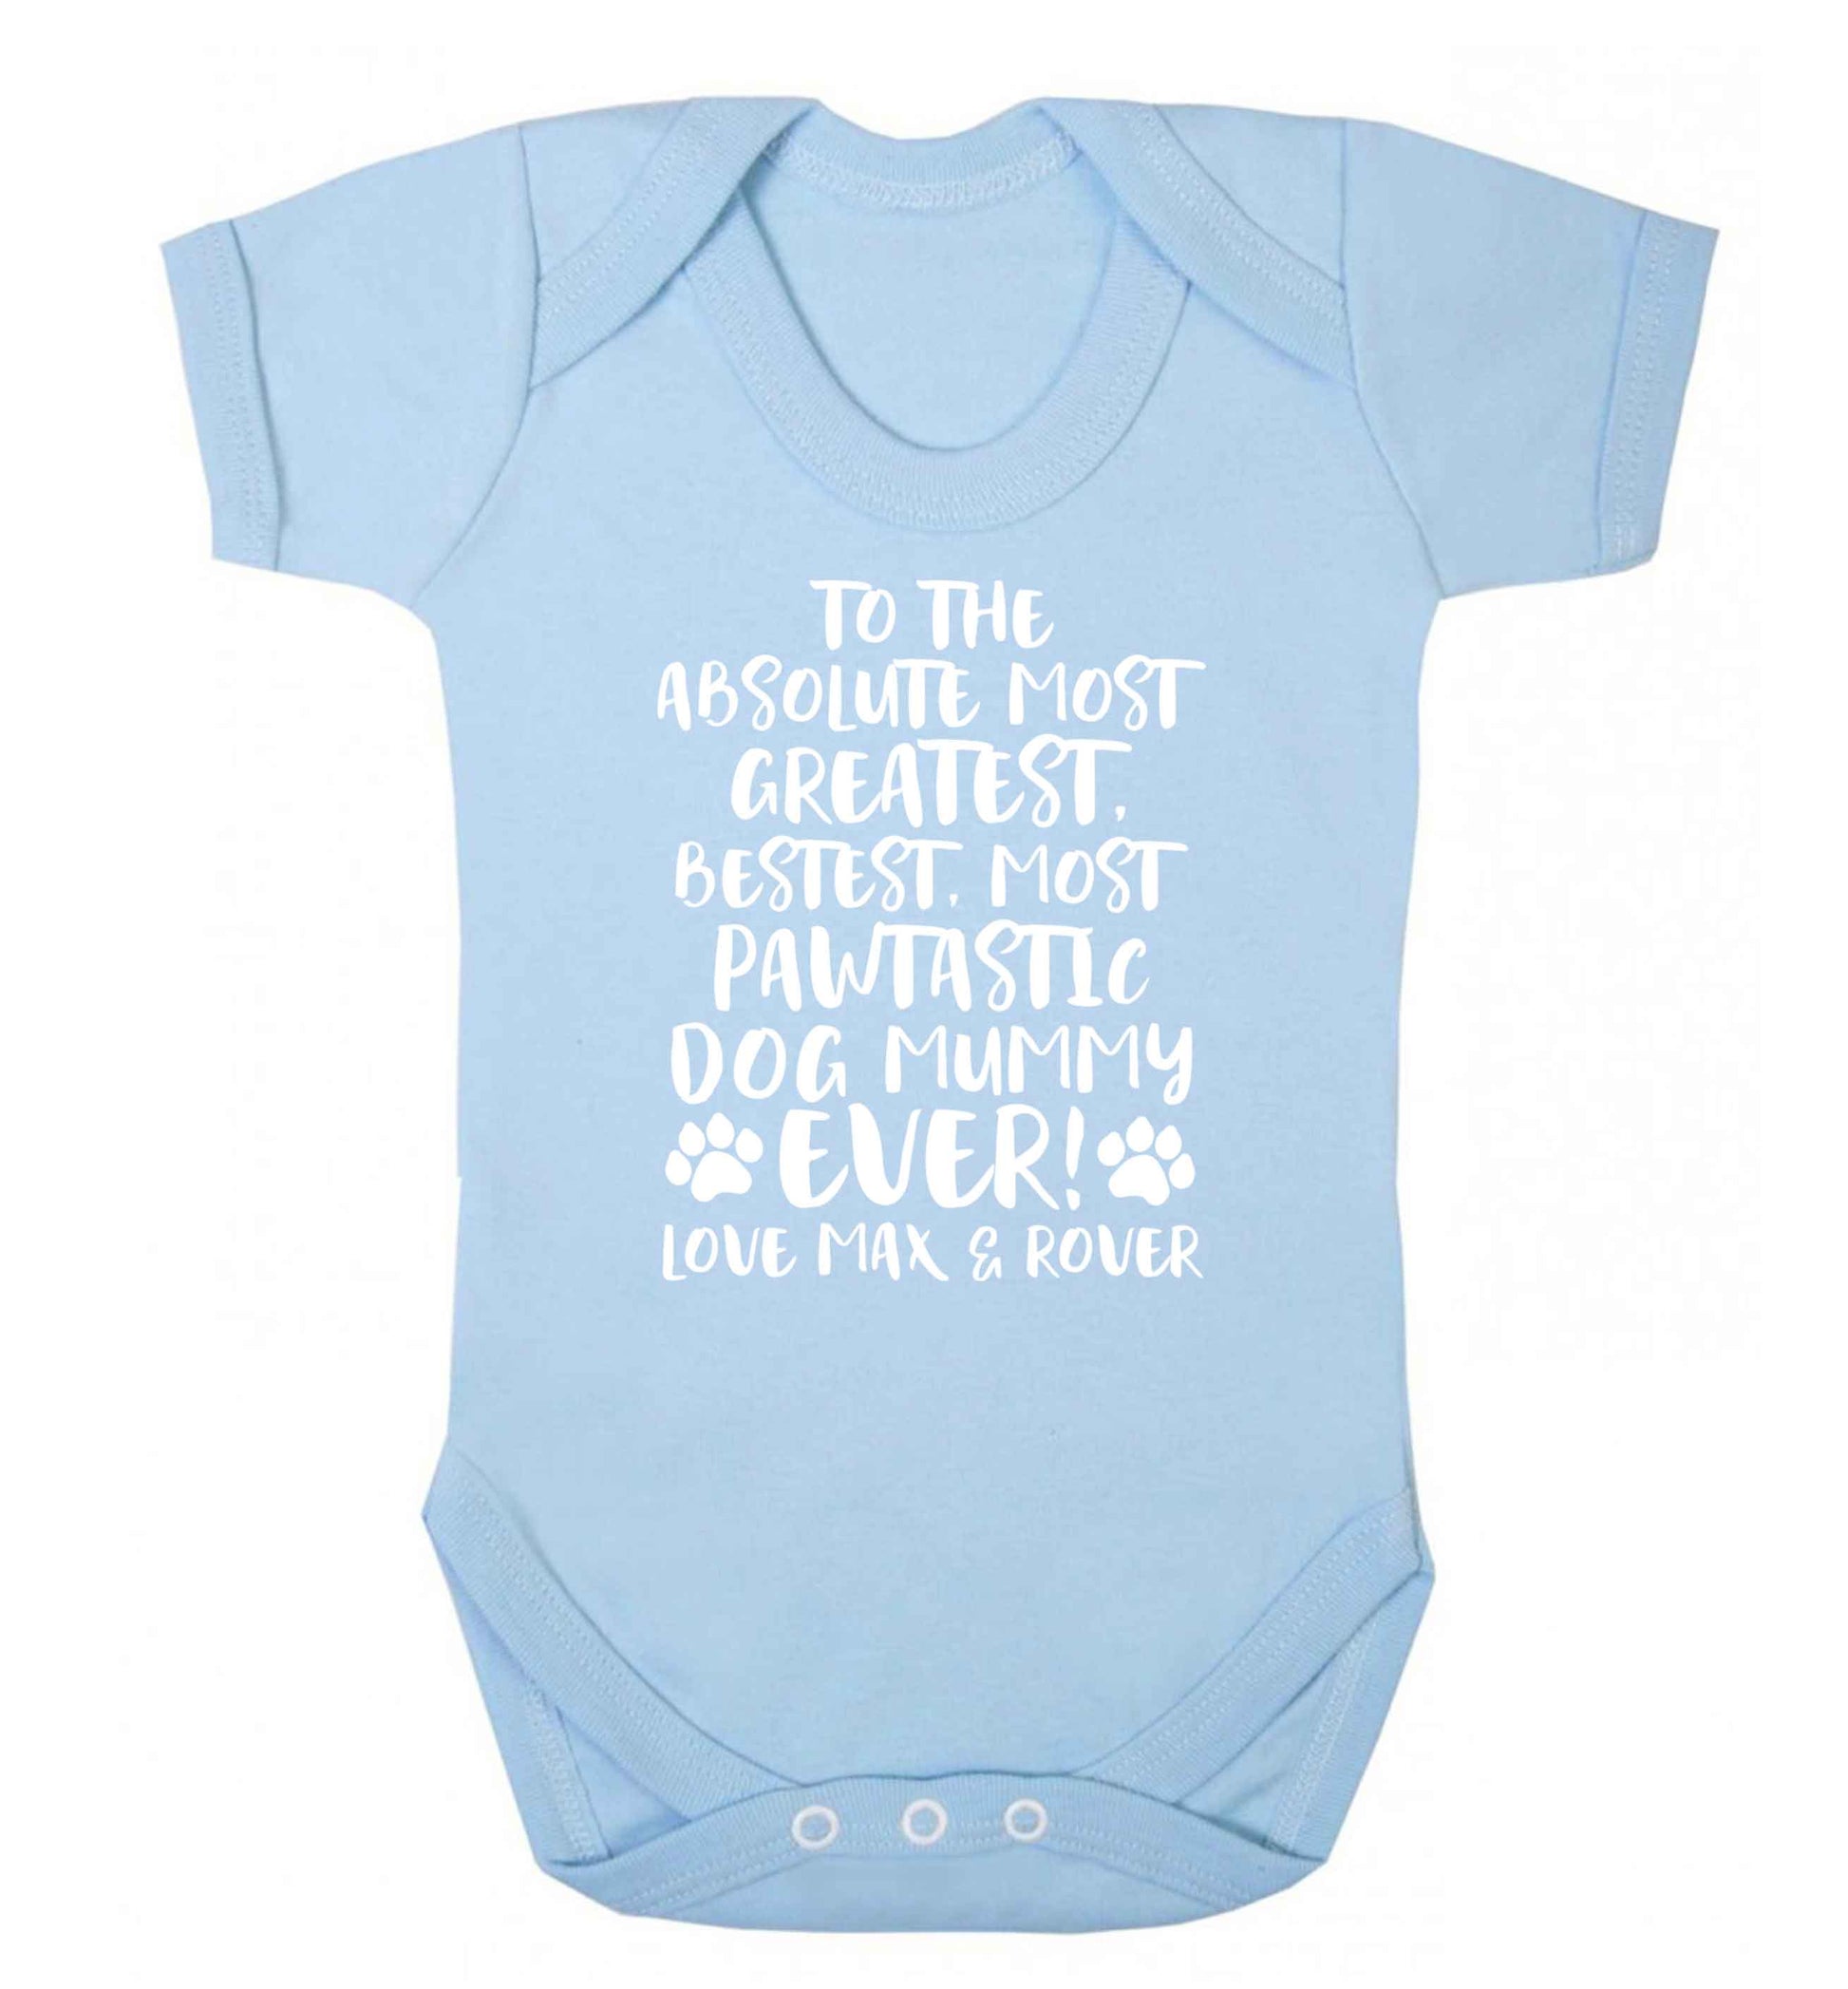 Personalsied to the most pawtastic dog mummy ever Baby Vest pale blue 18-24 months